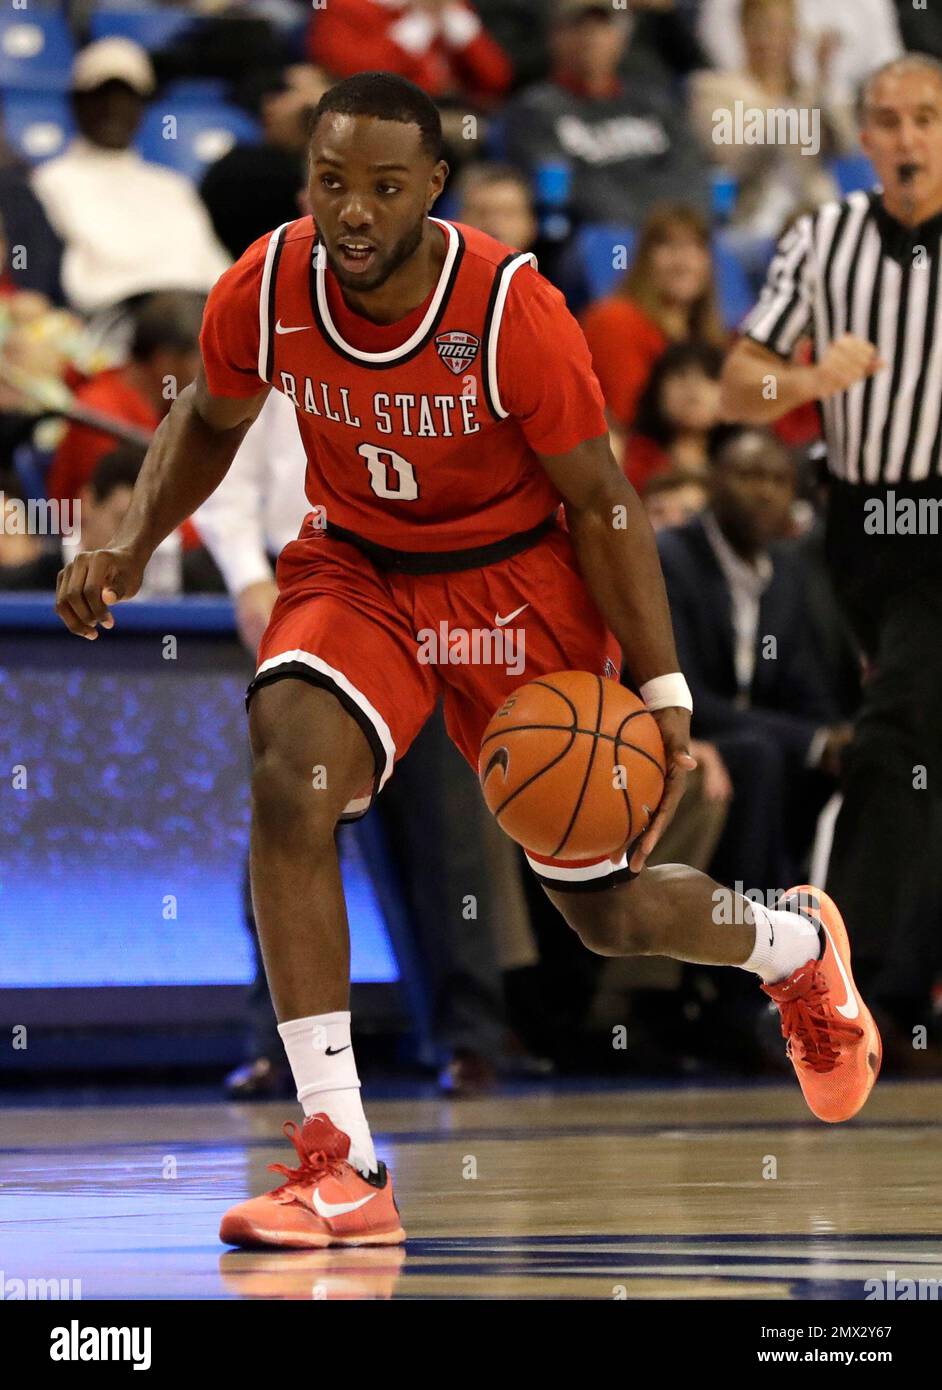 Ball State's Francis Kiapway brings the ball down the court during the ...